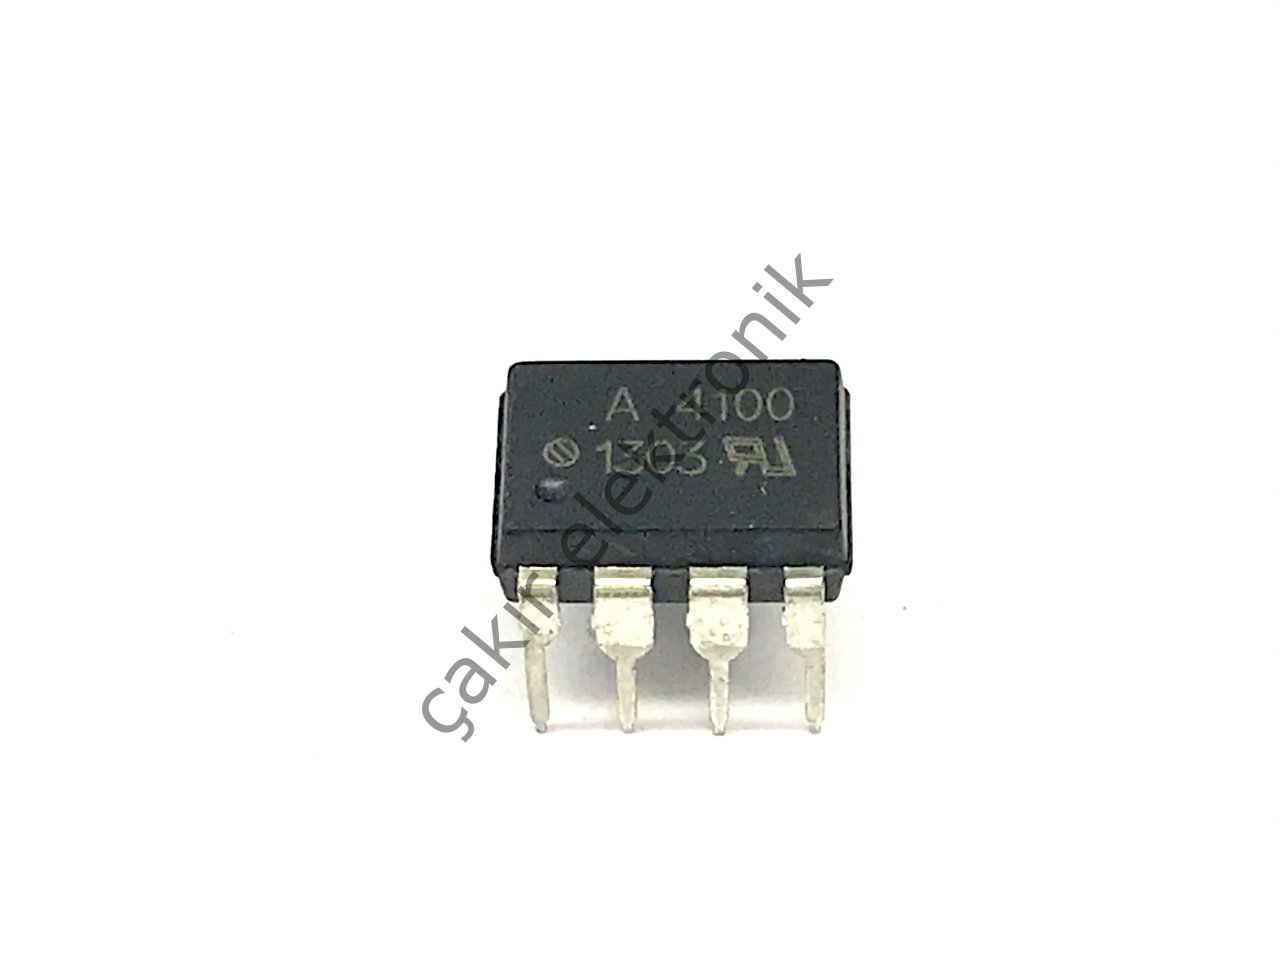 HP4100 , A4100 , HCPL4100 , HCPL-4100-000E Optically Coupled 20 mA Current Loop Transmitter